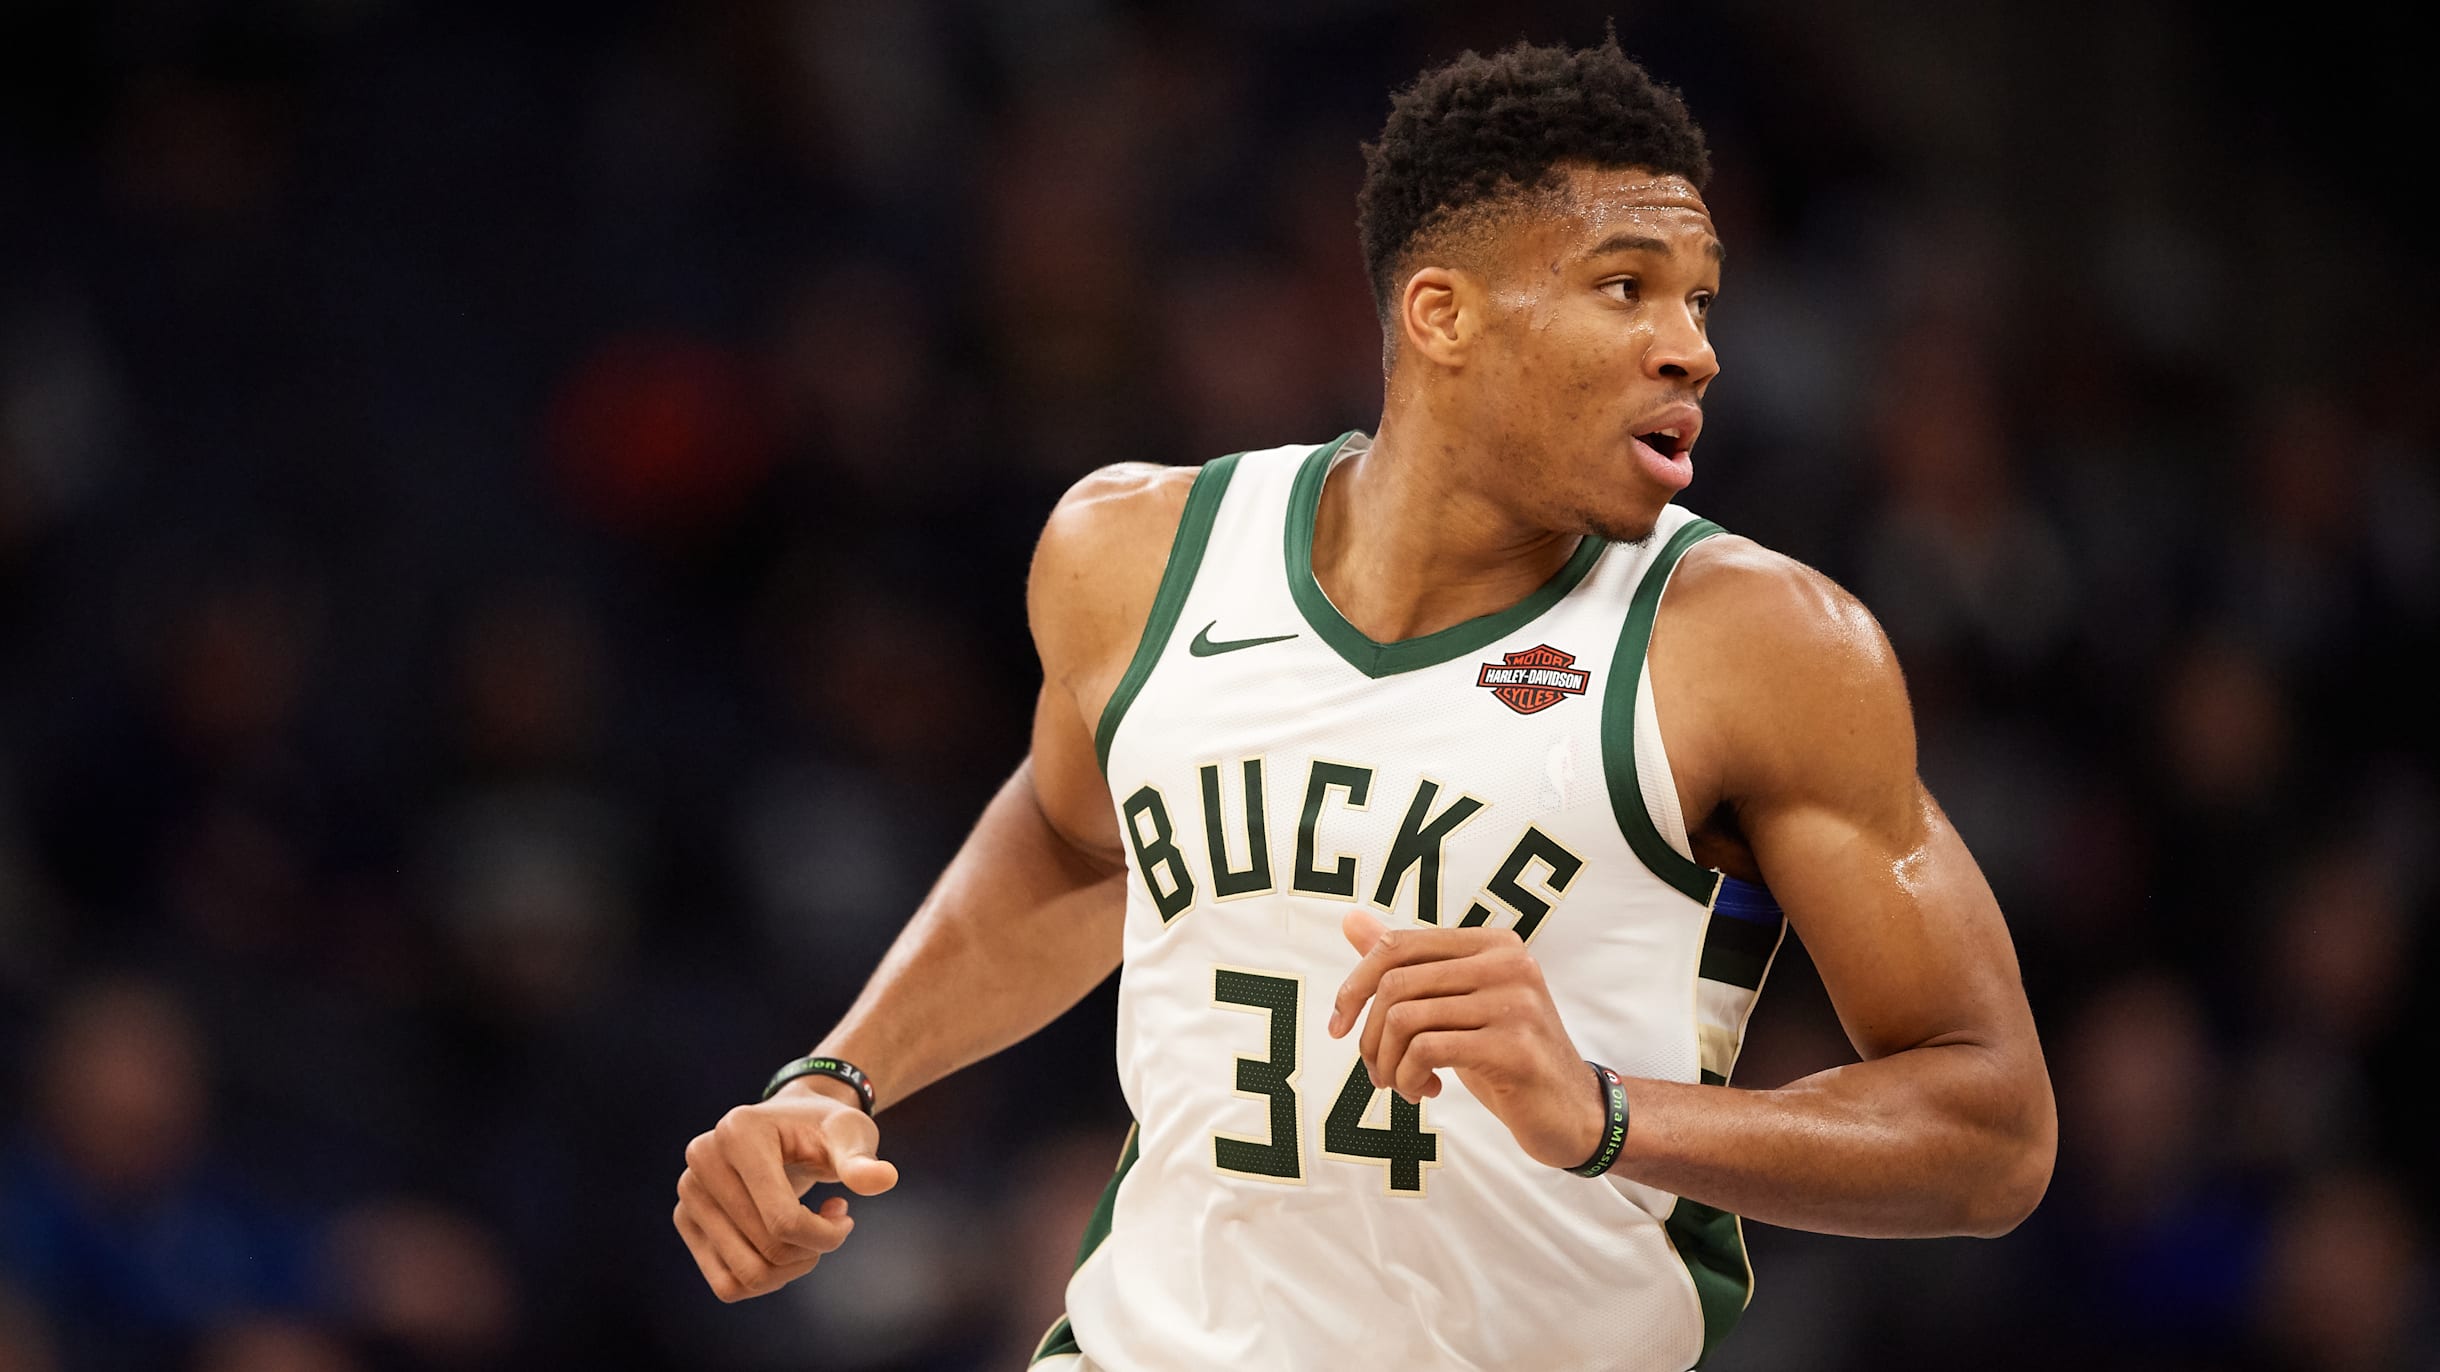 Giannis Antetokounmpo: From poverty in Greece to NBA's most